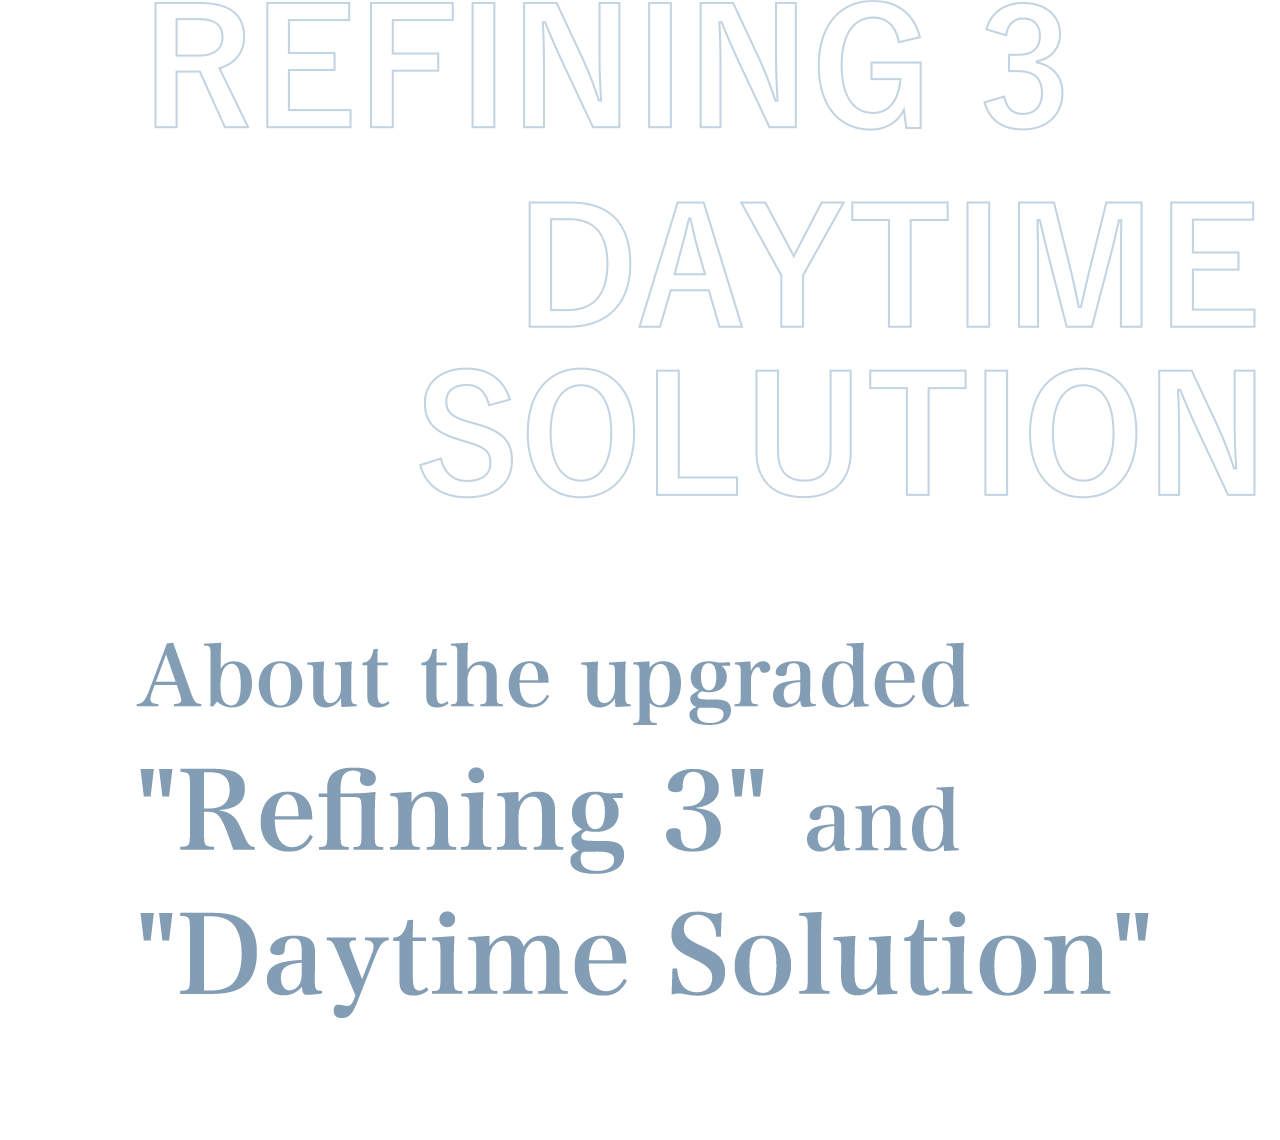 About the upgraded "Refining 3" and "Daytime Solution"